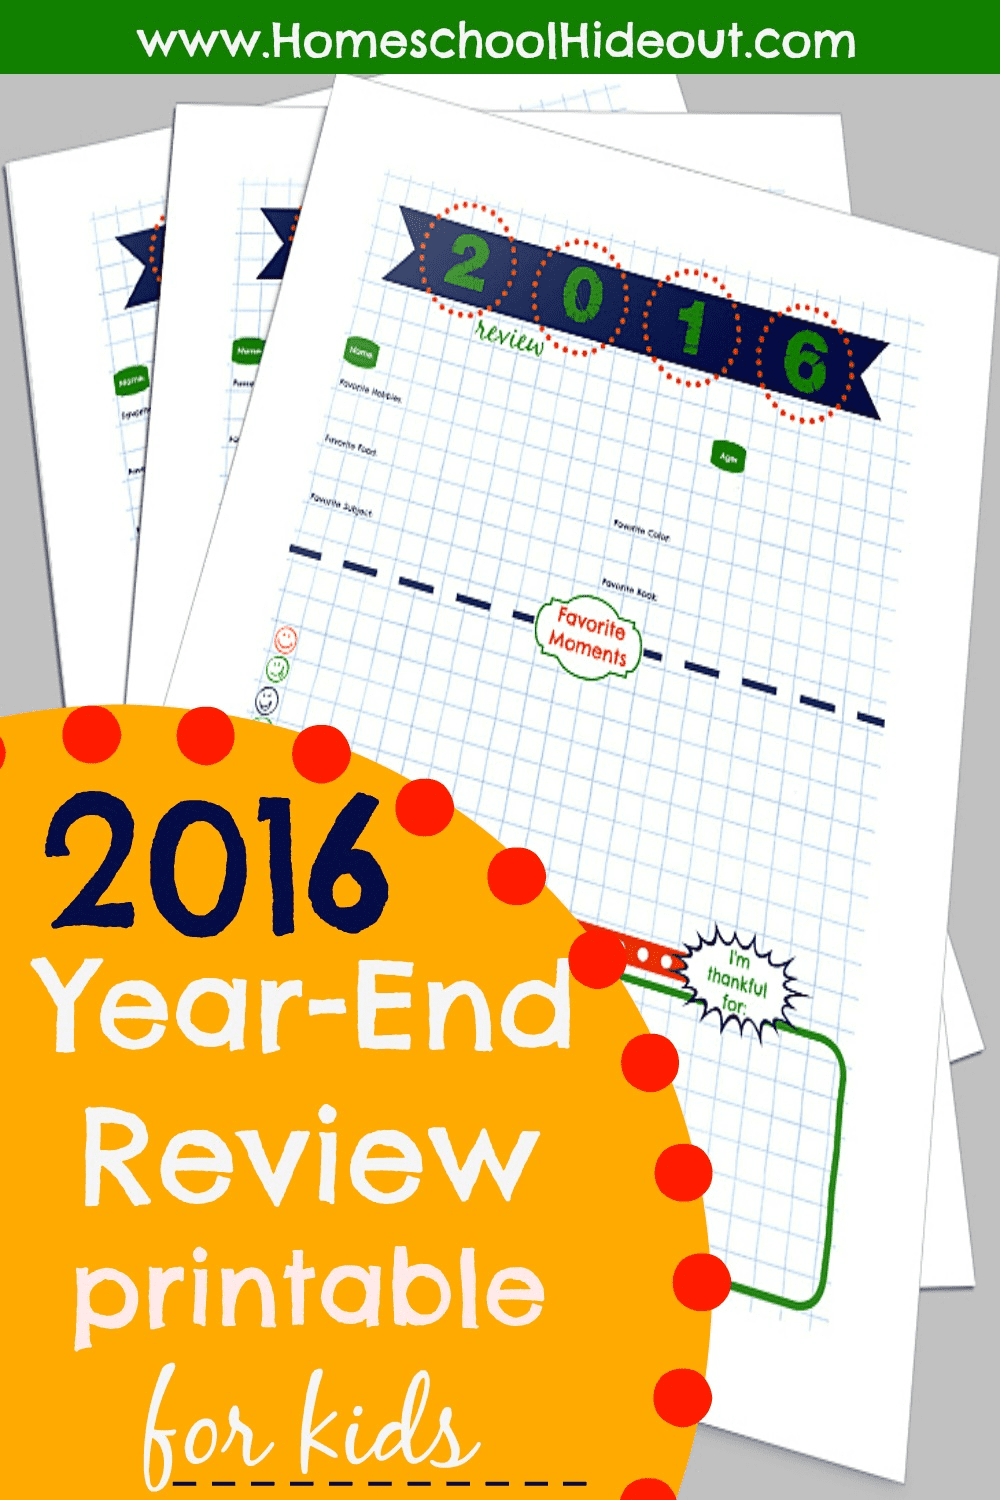 I am LOVING this simple way to freeze the memories of 2016! Document them with this super cute end of year review printable. My kids had fun thining back to EVERYTHING that happened over the last 12 months.